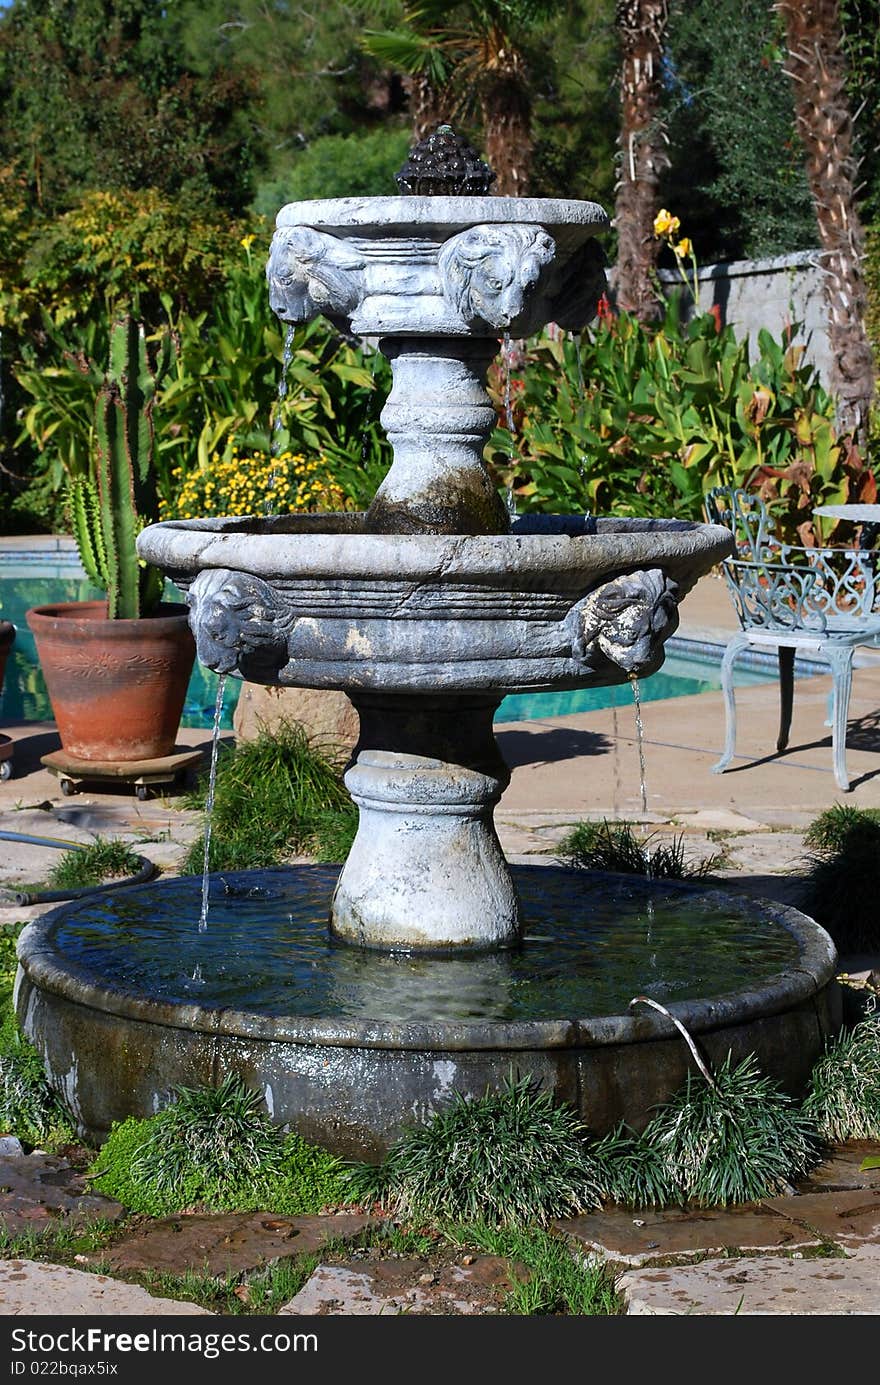 A water fountain waits to entertain guests on a sunny patio.